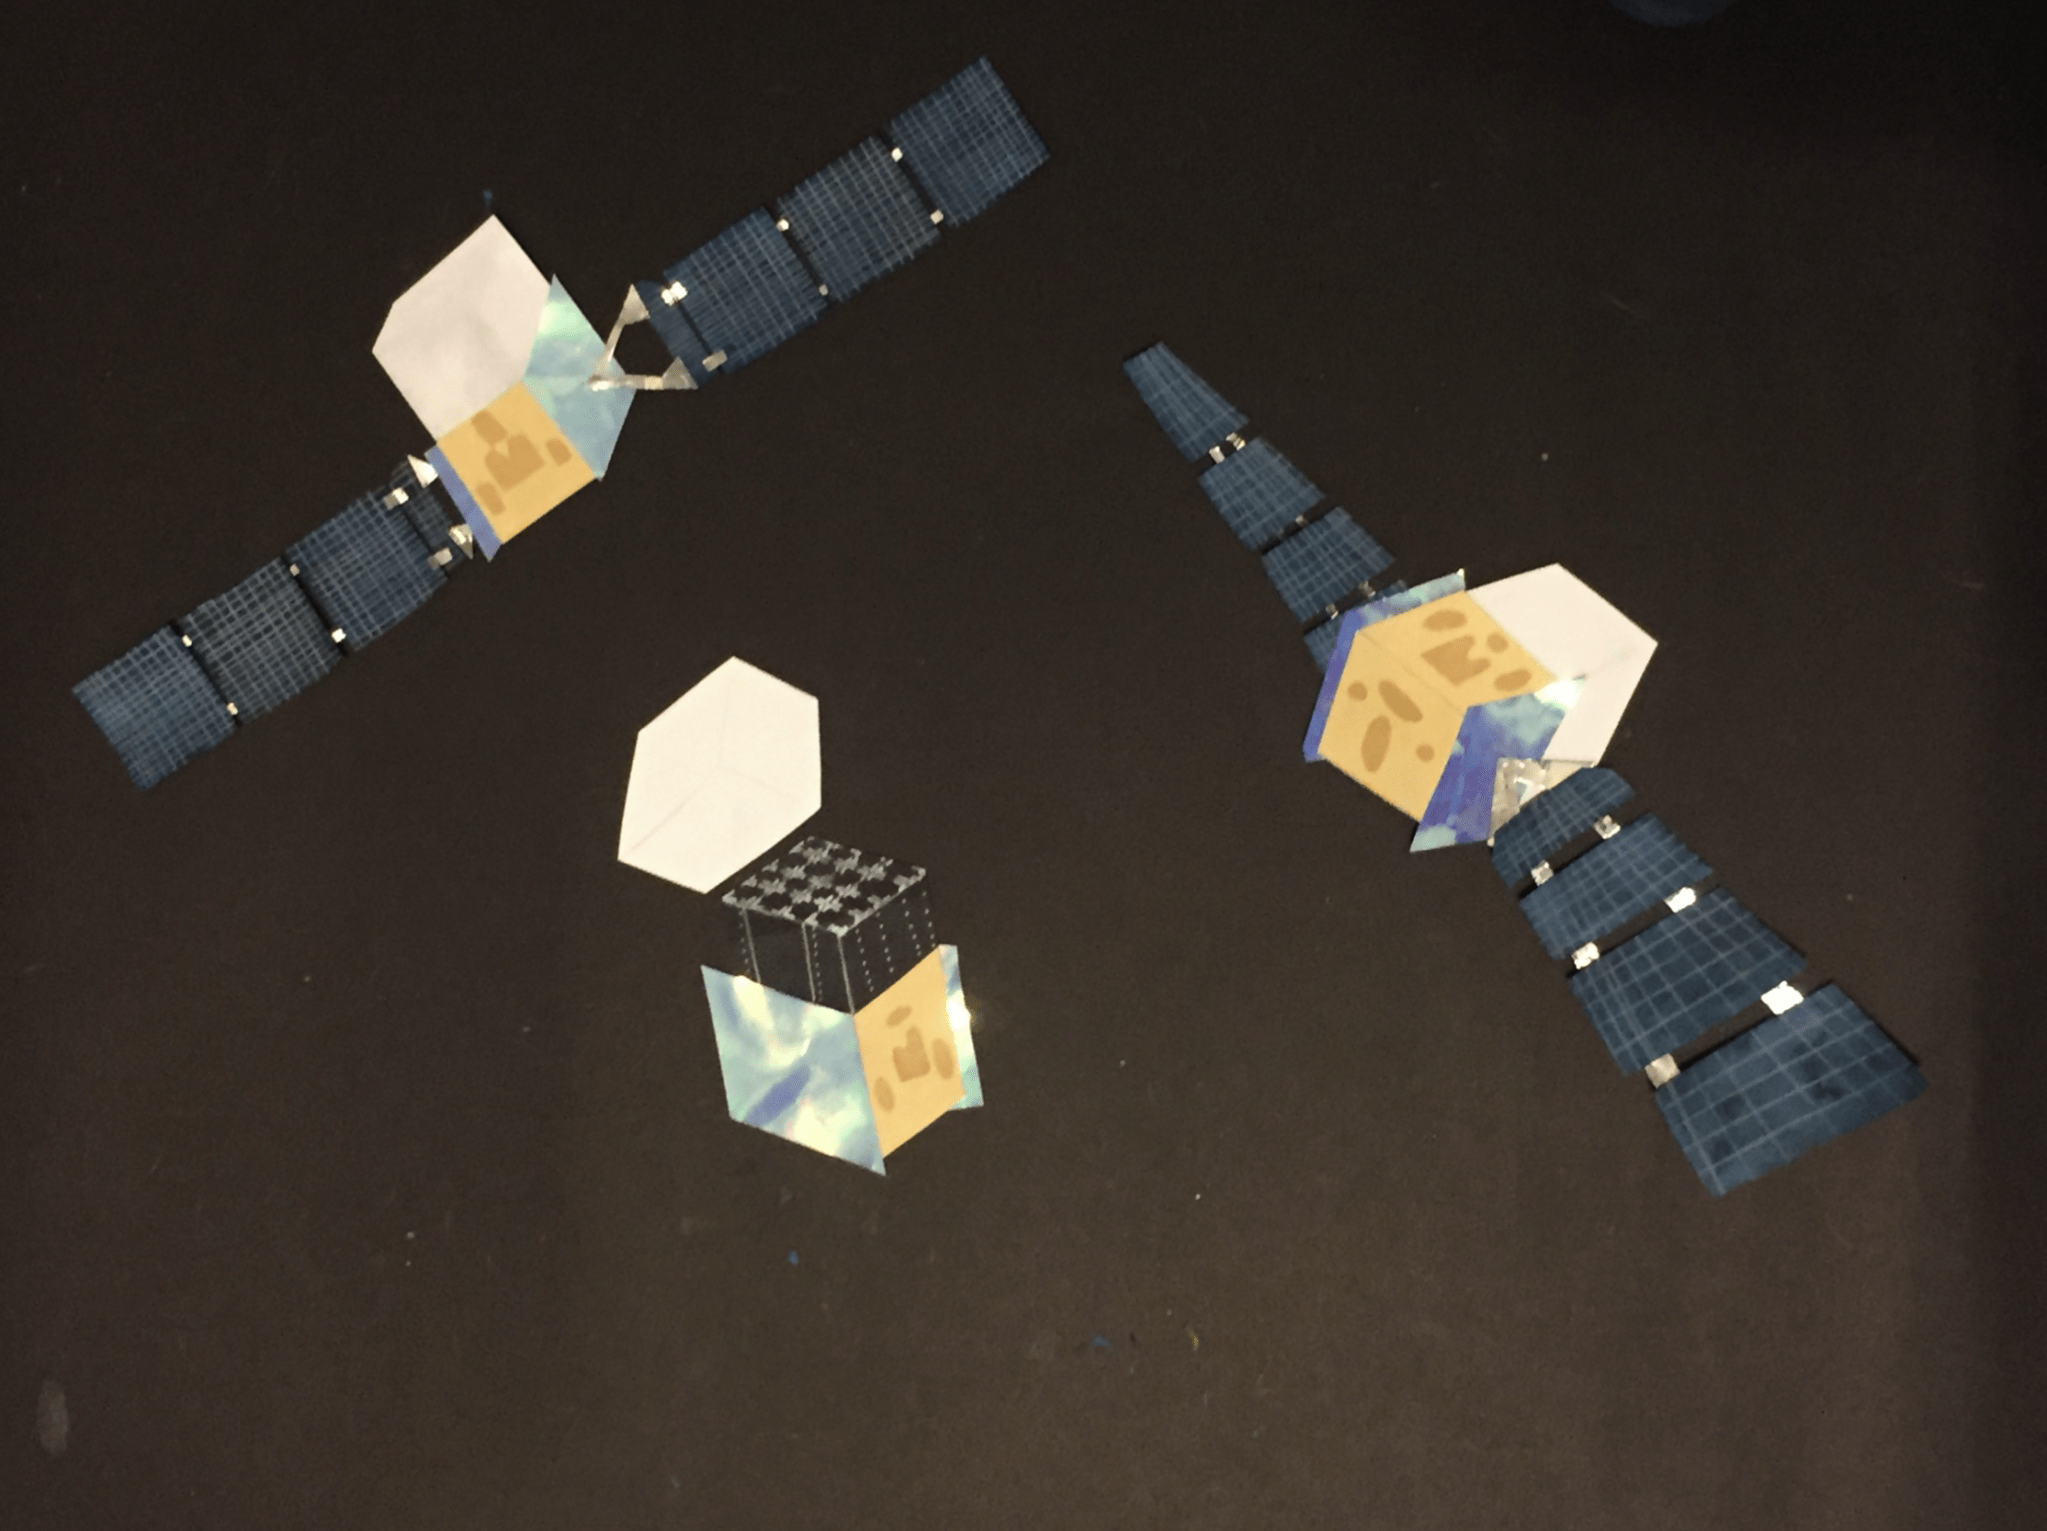 three images of a spacecraft created from cut paper